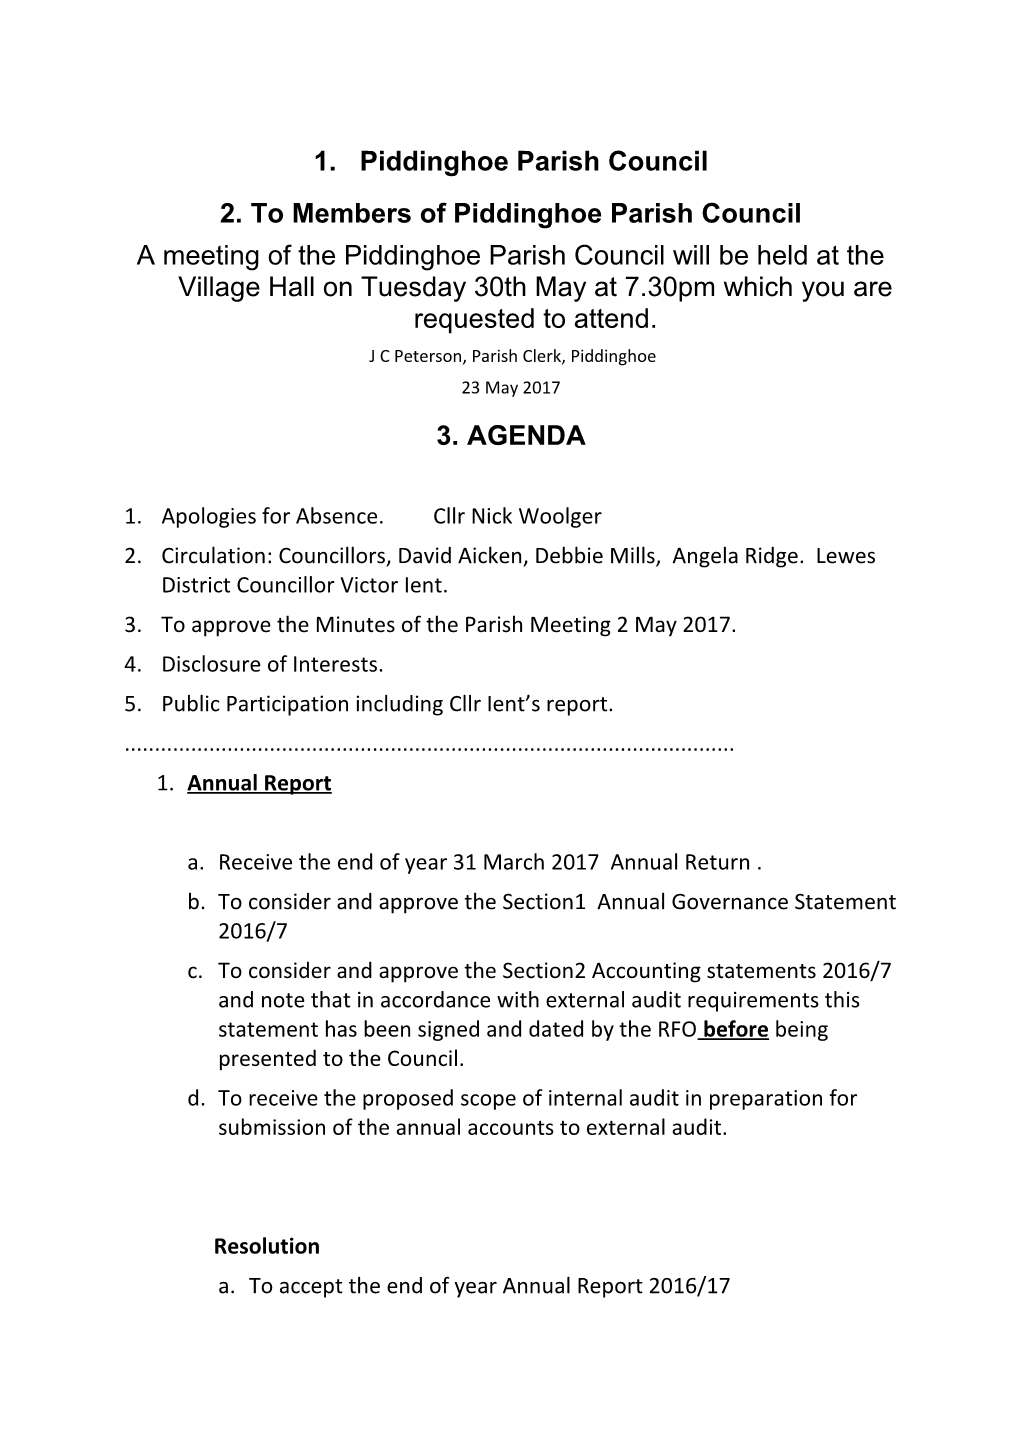 To Members of Piddinghoe Parish Council